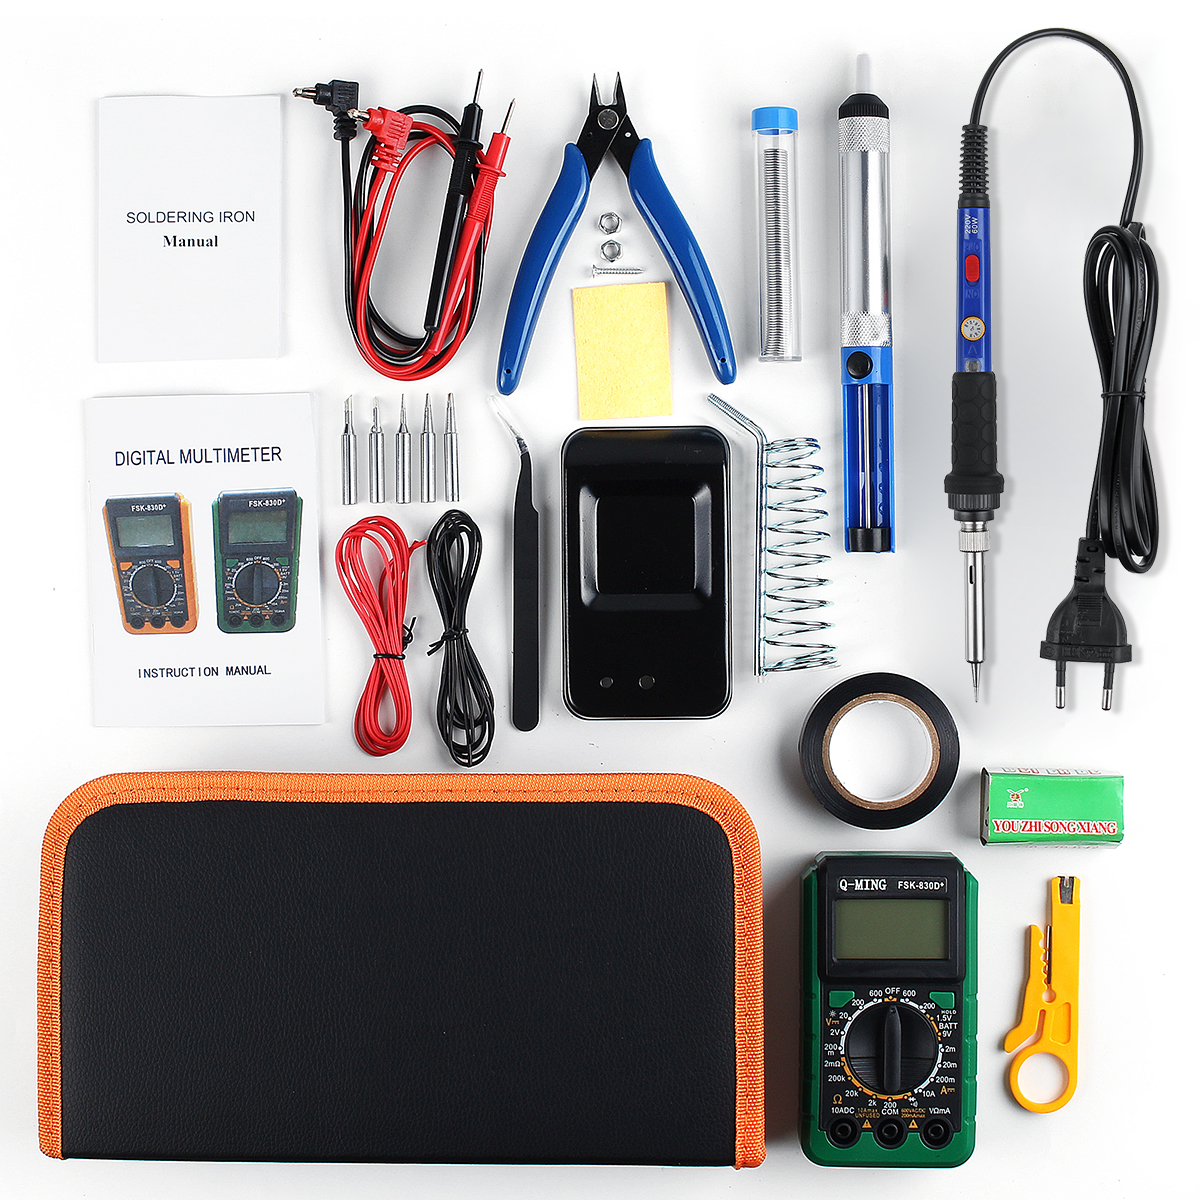 110V-60W-22Pcs-Electric-Adjustable-Temperature-Soldering-Iron-Kit-Welding-Tool-With-Multimeter-1656185-4